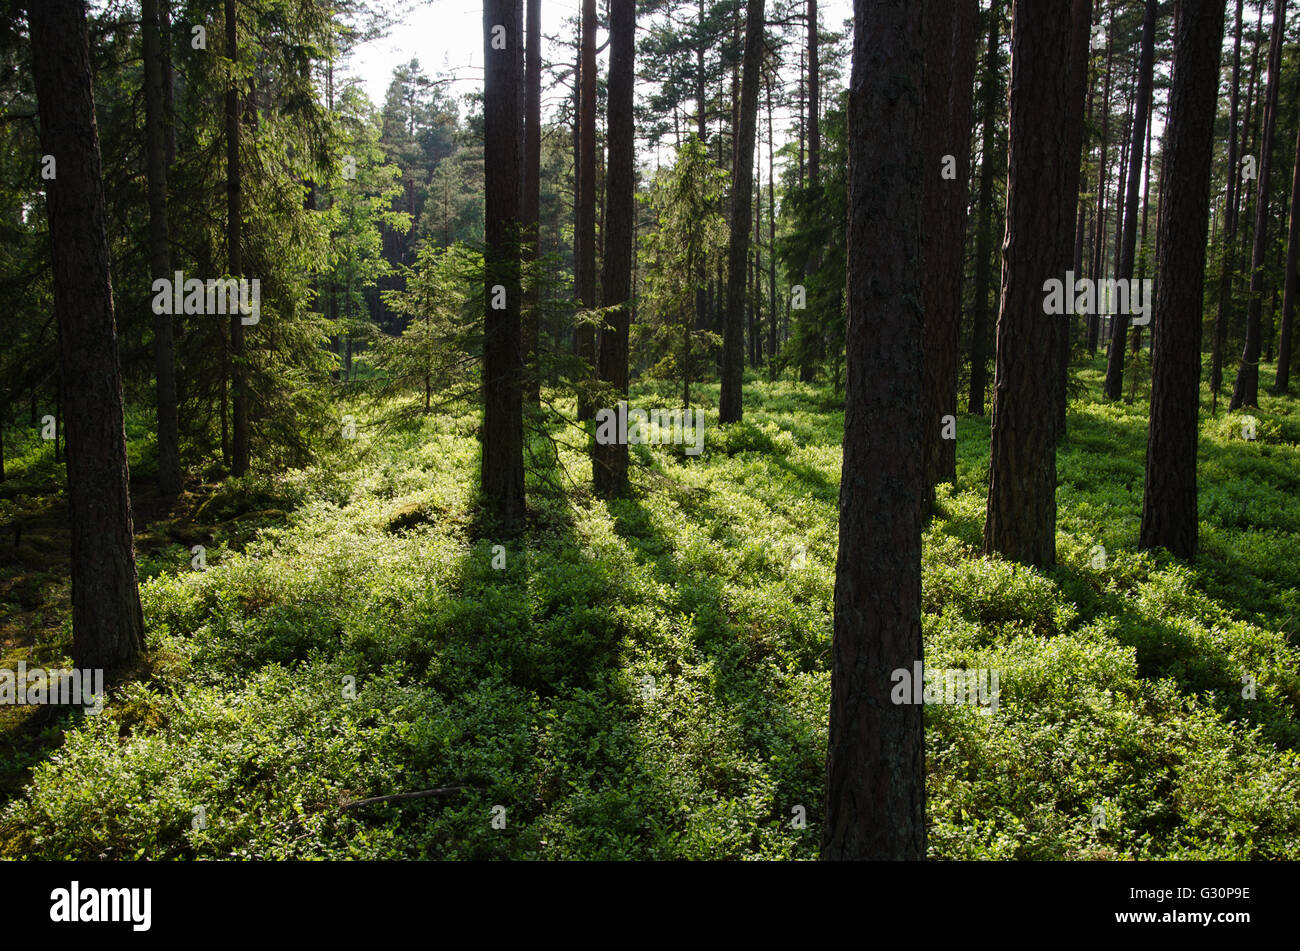 Beautiful pine tree forest with the ground covered of fresh green blueberry bushes Stock Photo